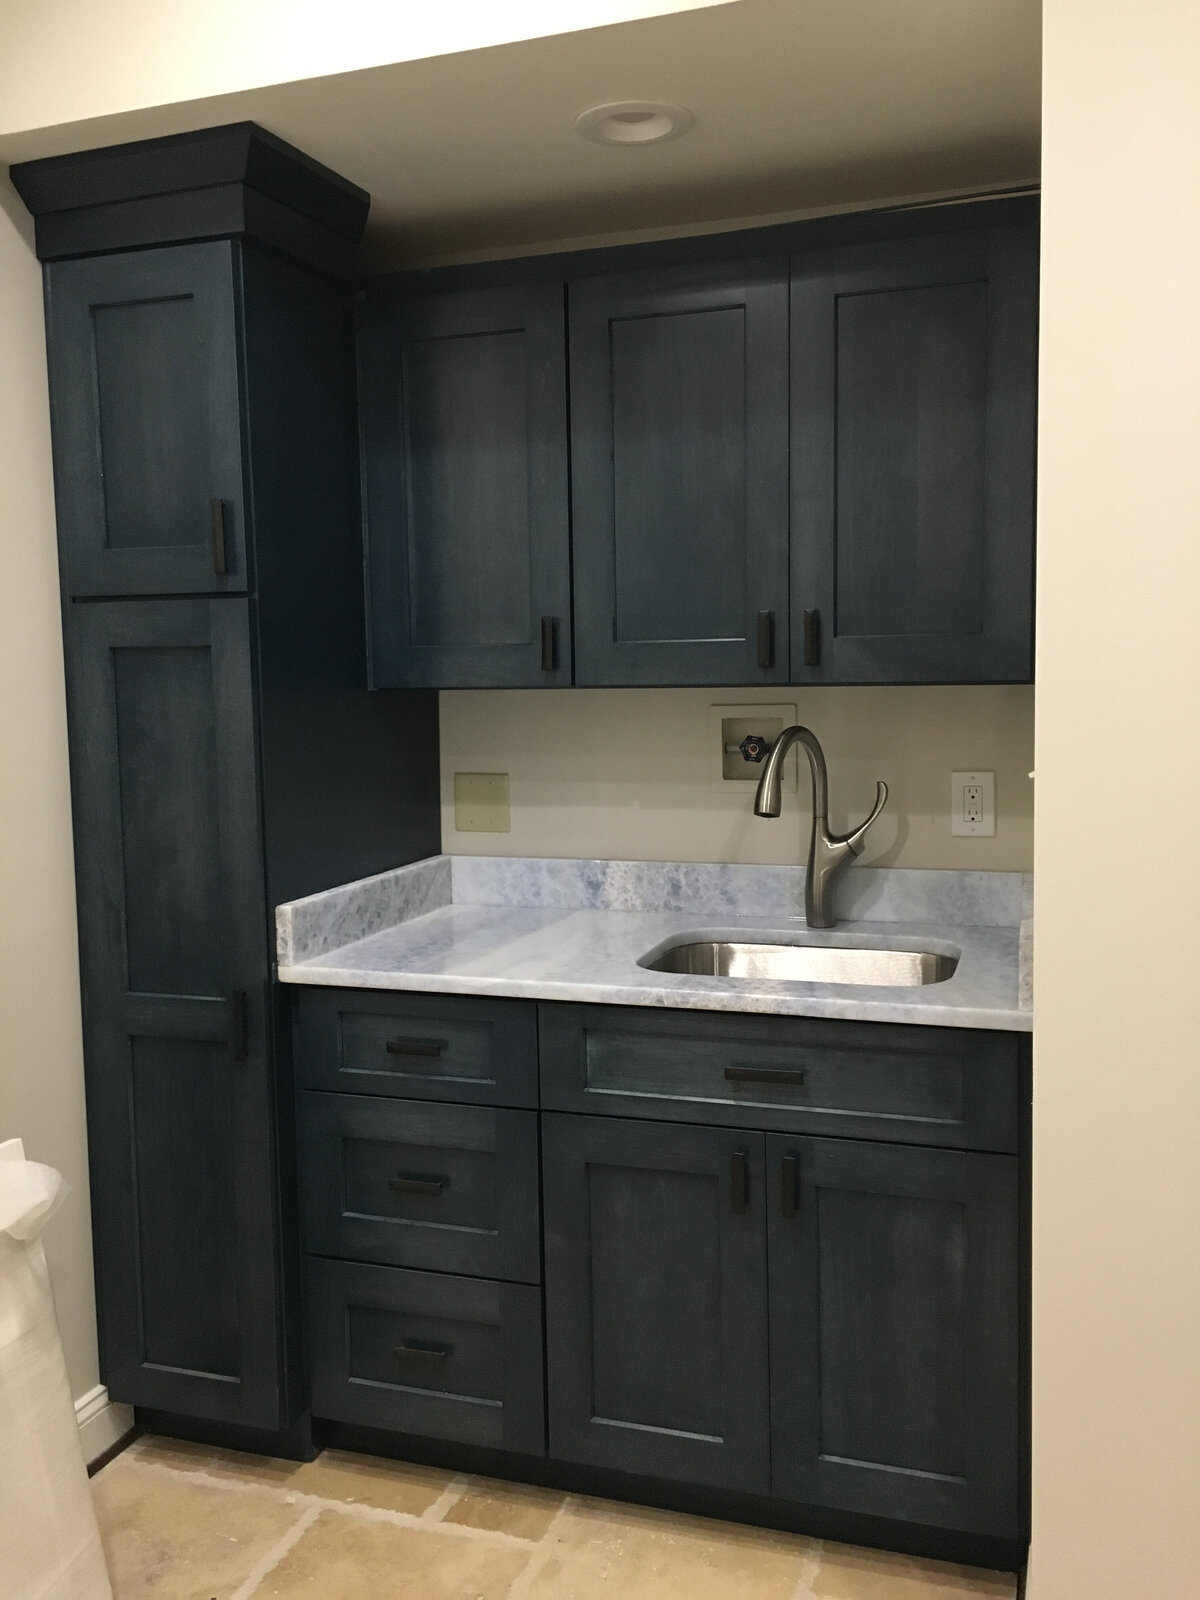 oakton-home-after-cabinet--and-granite-install_24092141600_o